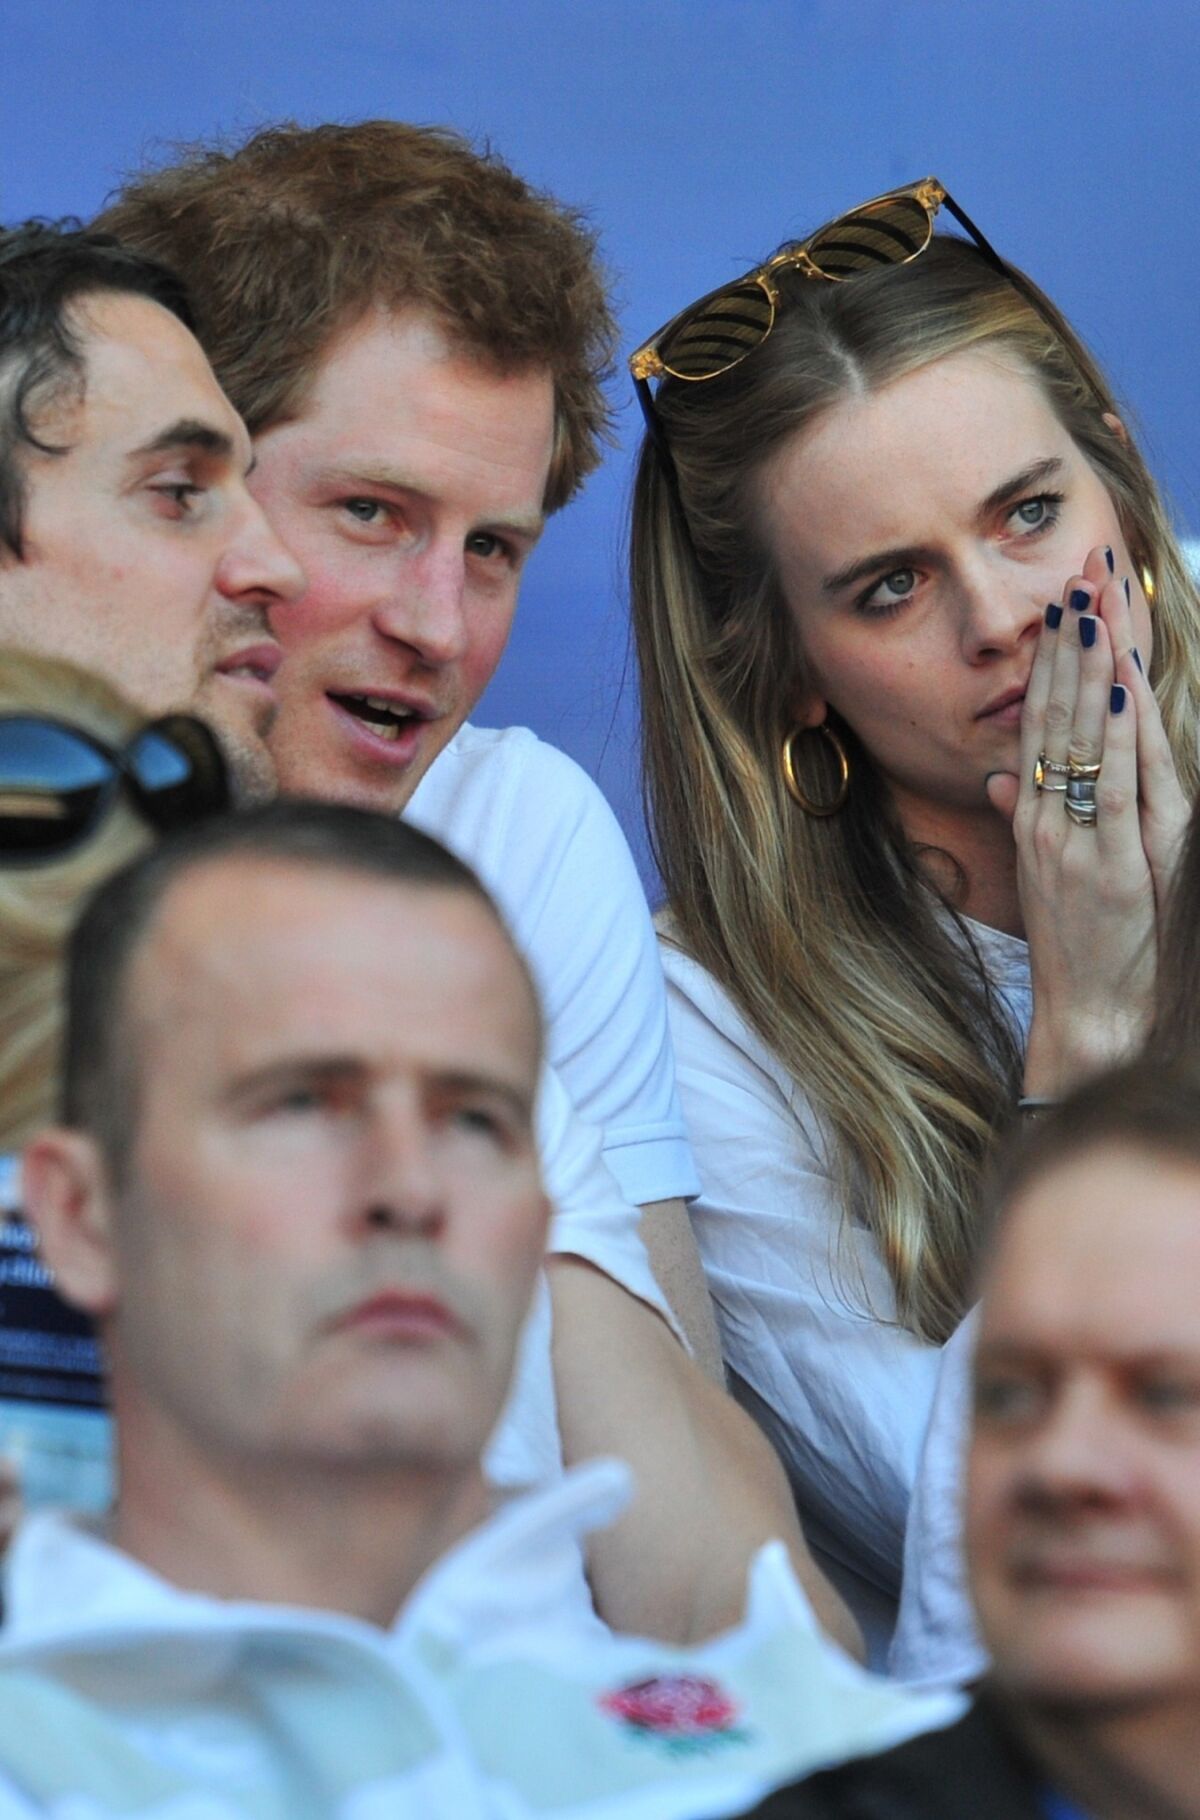 Prince Harry and British socialite Cressida Bonas watch the England-Wales match during the Six Nations International Rugby Union.